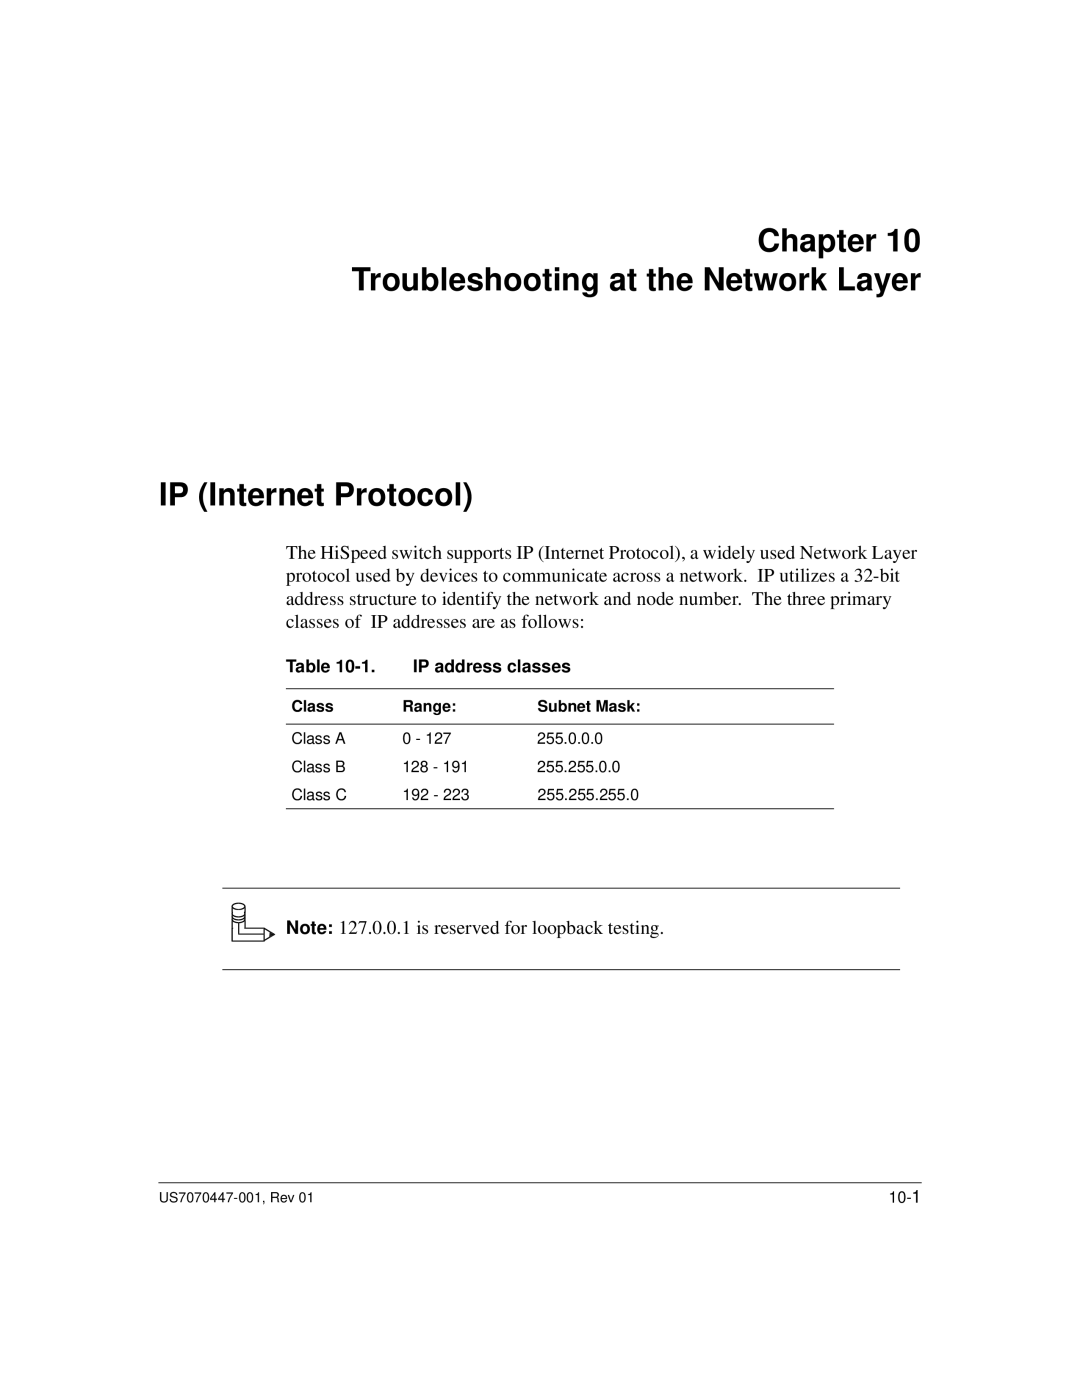 Hitachi US7070447-001 manual Chapter Troubleshooting at the Network Layer IP Internet Protocol 